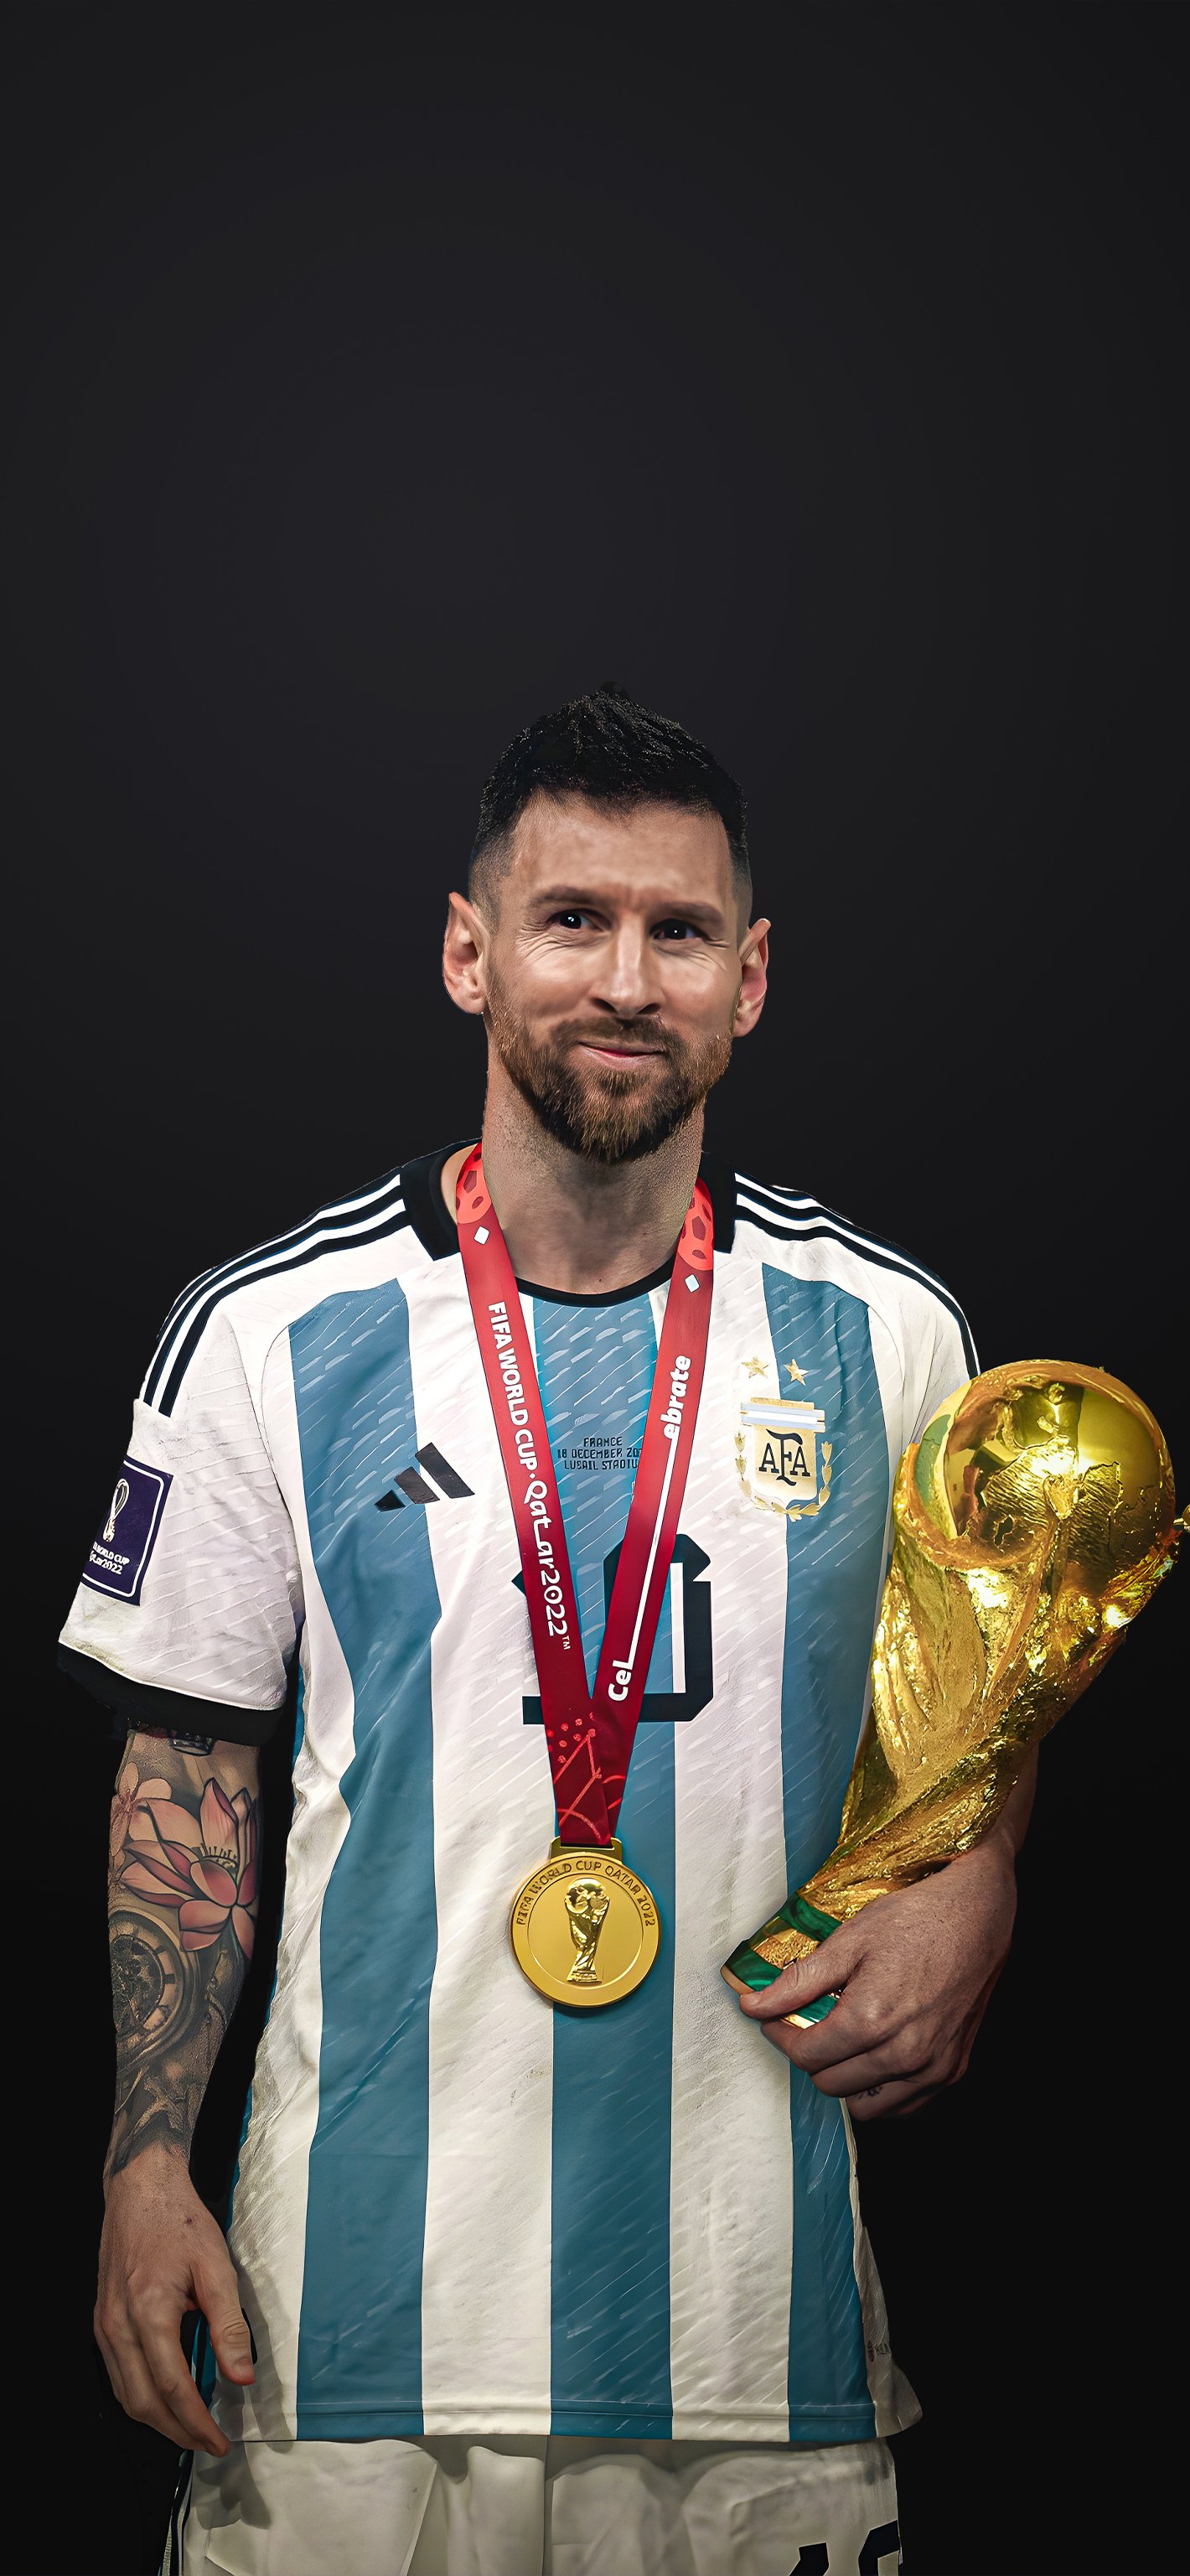 Lionel Messis World Cup Trophy Photo Is MostLiked Post on Instagram